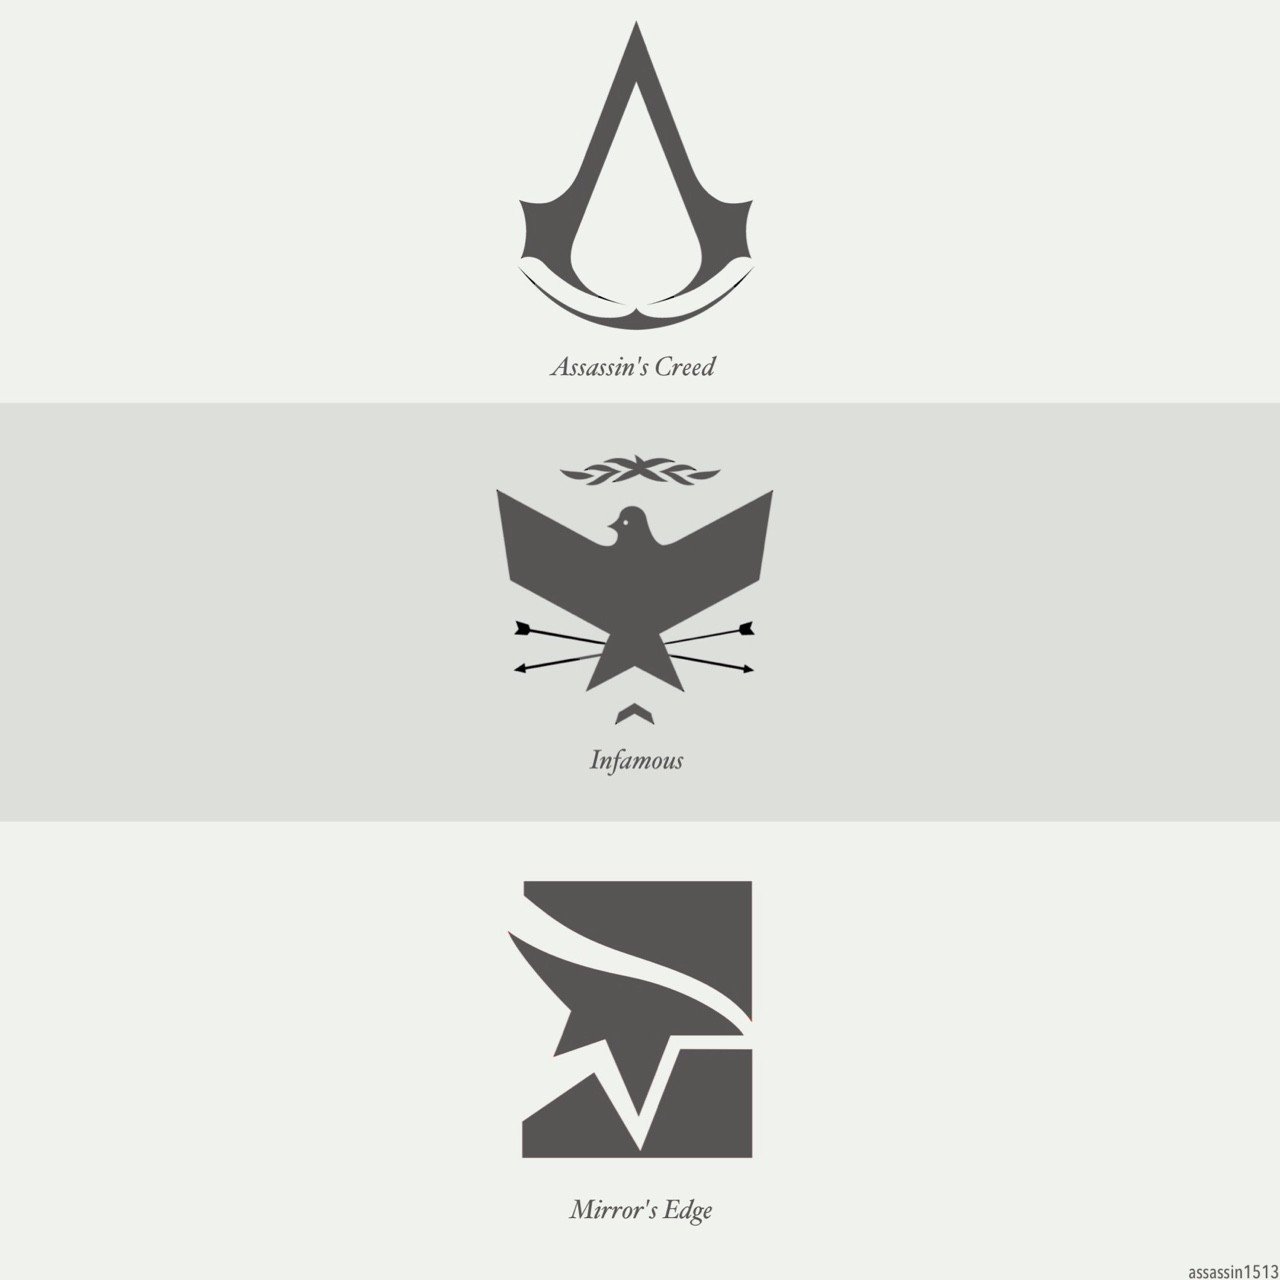 Photo by the5impleton with the username @the5impleton, who is a verified user,  December 14, 2017 at 1:41 AM and the text says 'assassin1513:

[Minimalistic Video Games Collection]
[Edits made by me :)] #assassins  #creed  #mirrors  #edge  #the  #witcher  #the  #elder  #scrolls  #skyrim  #deus  #ex  #half  #life  #zelda  #metal  #gear  #solid  #bioshock  #grand  #theft  #auto..'